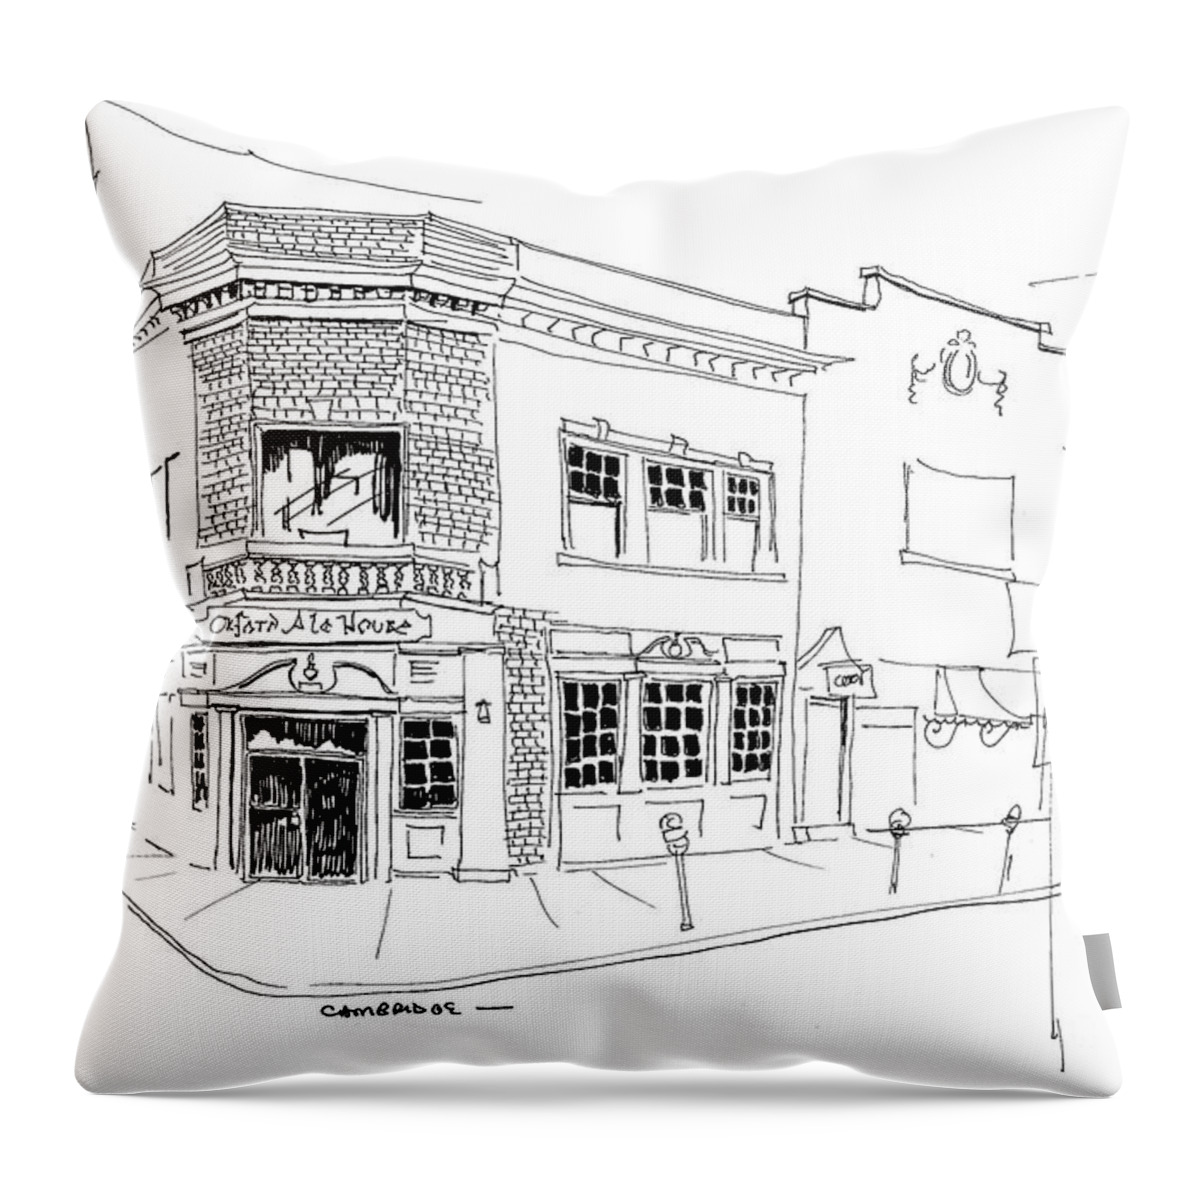 Pen & Ink Throw Pillow featuring the drawing Oxford Ale House by William Renzulli